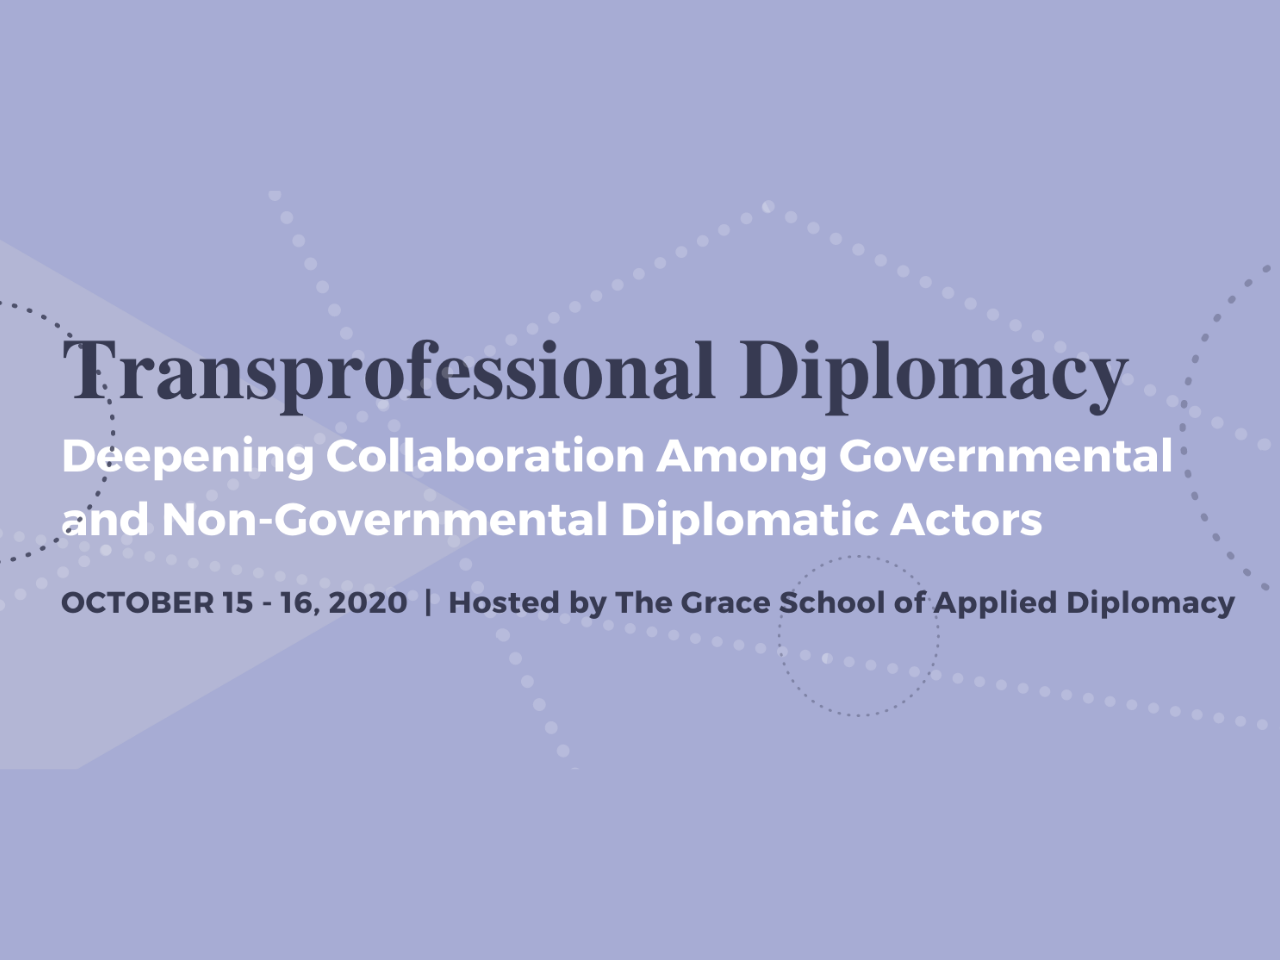 Transprofessional Diplomacy conference announcement